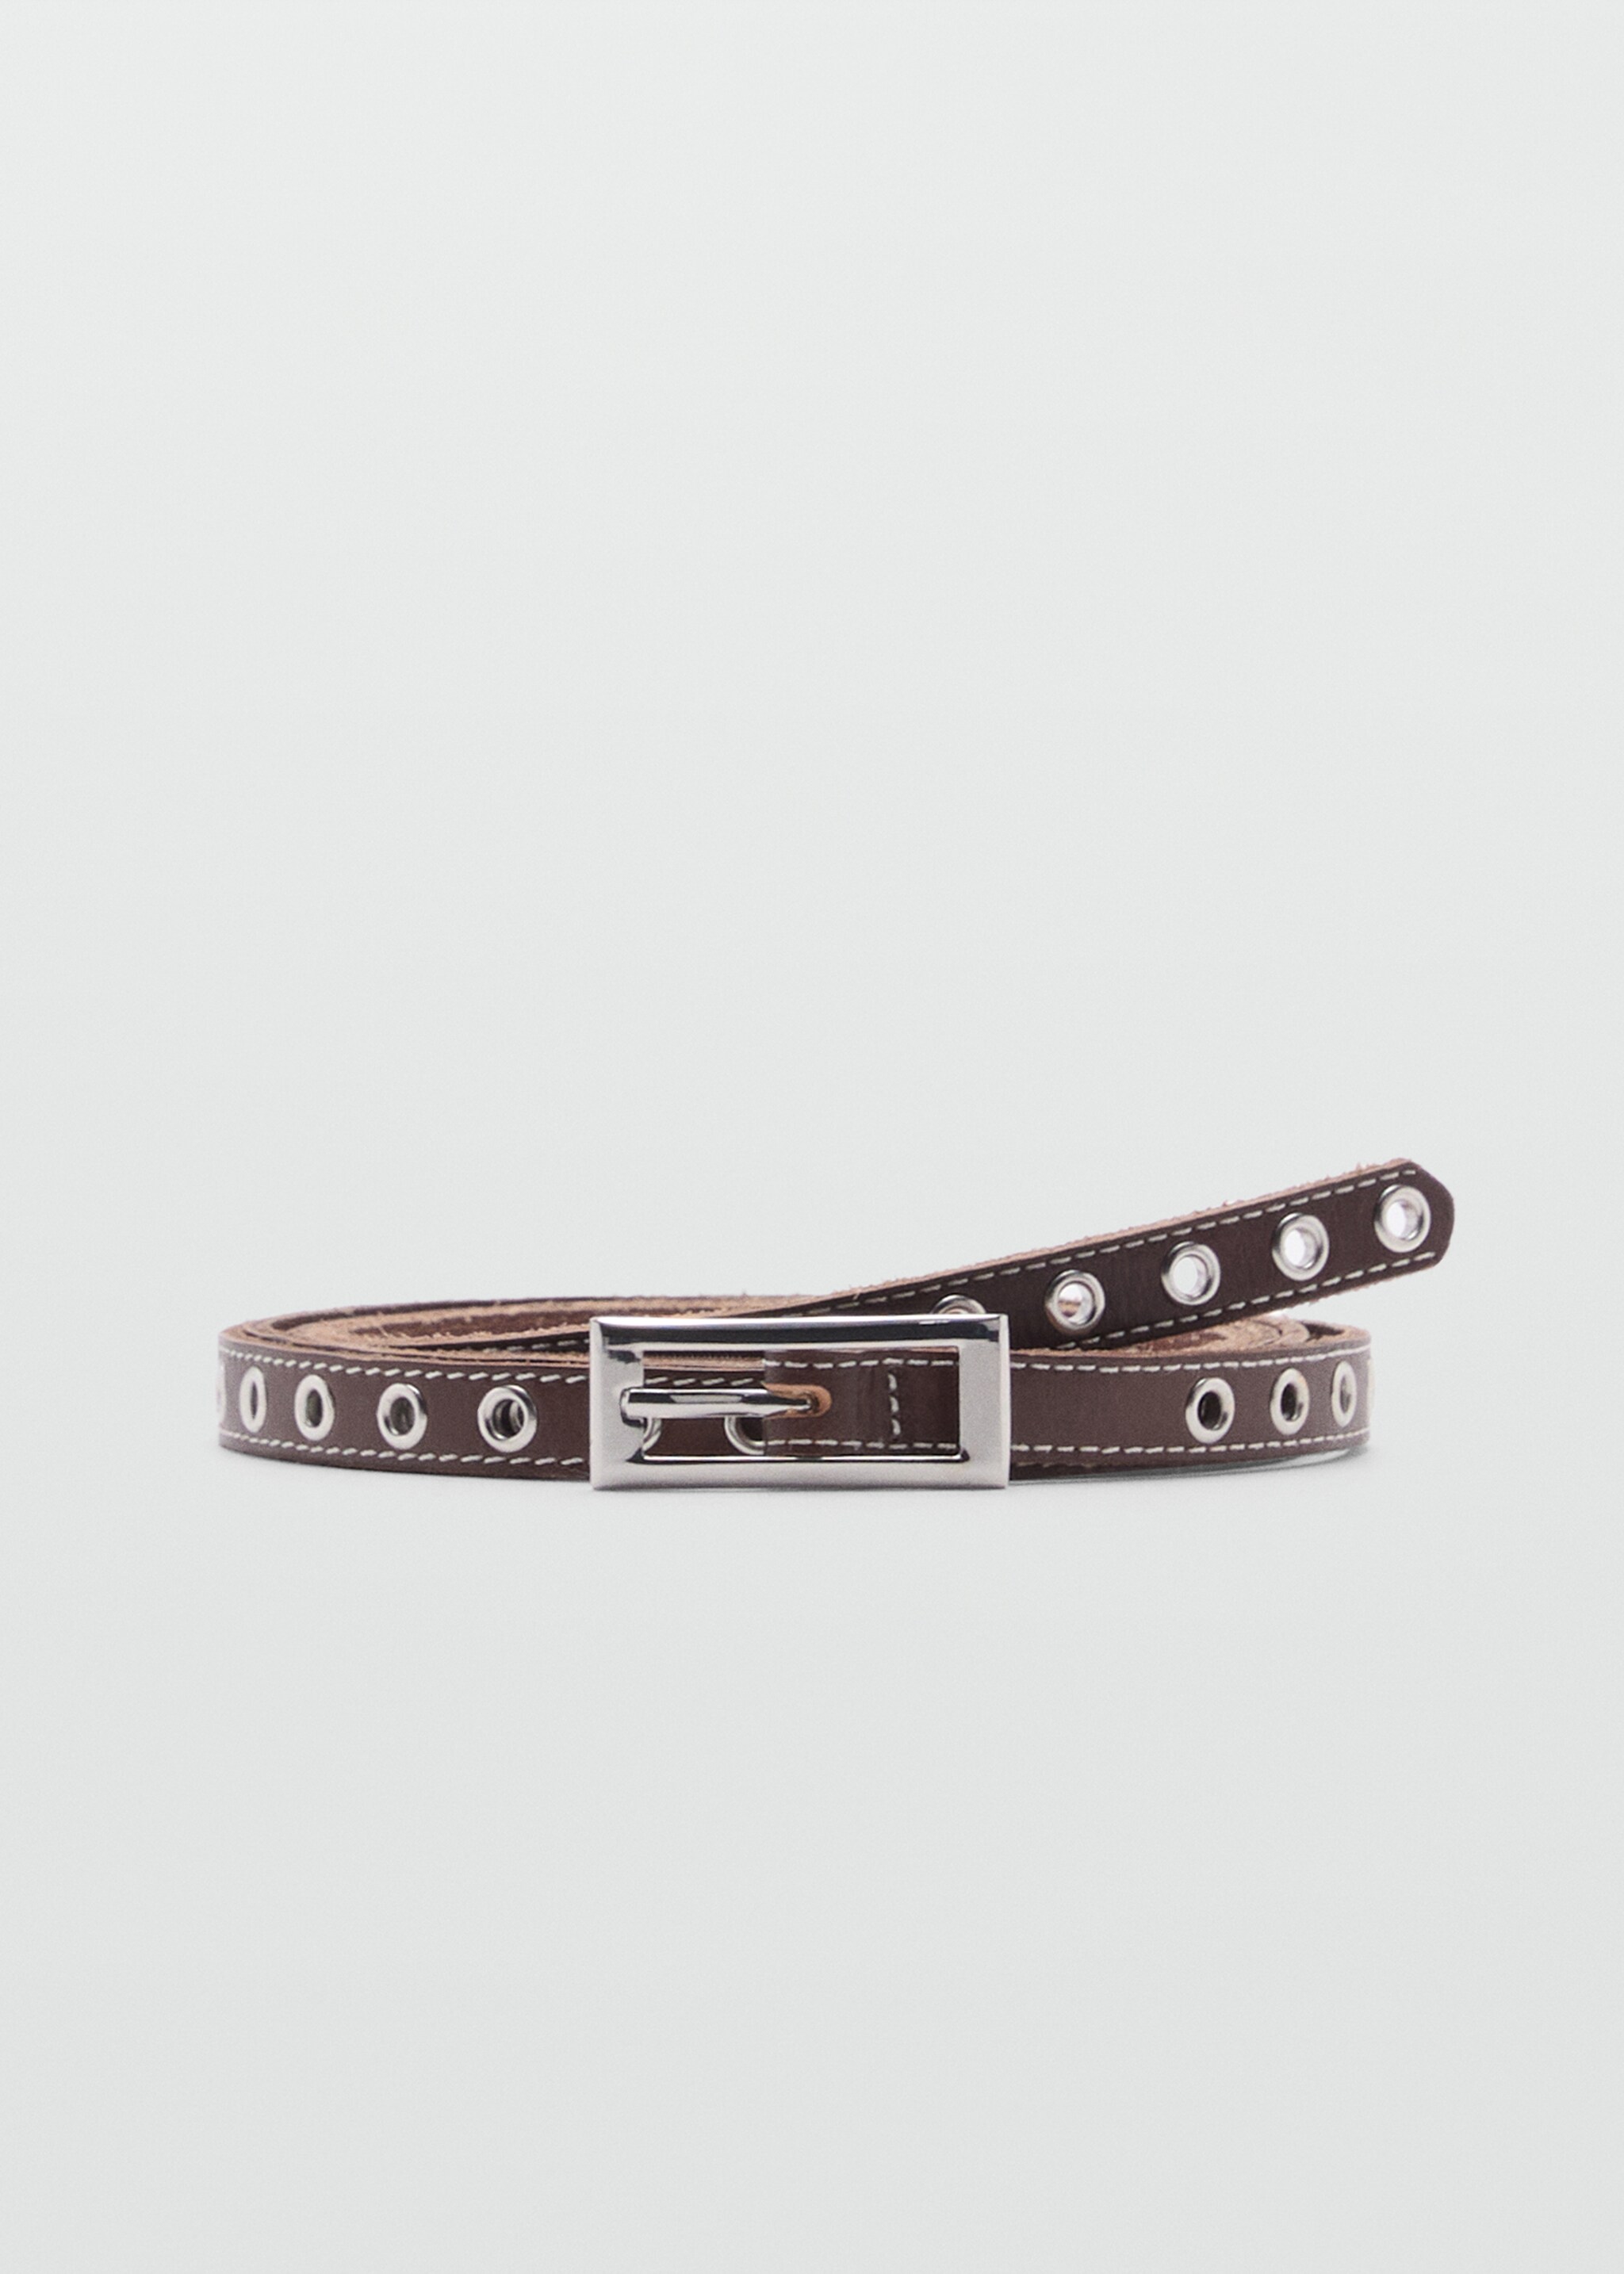 Laser-cut leather belt - Article without model